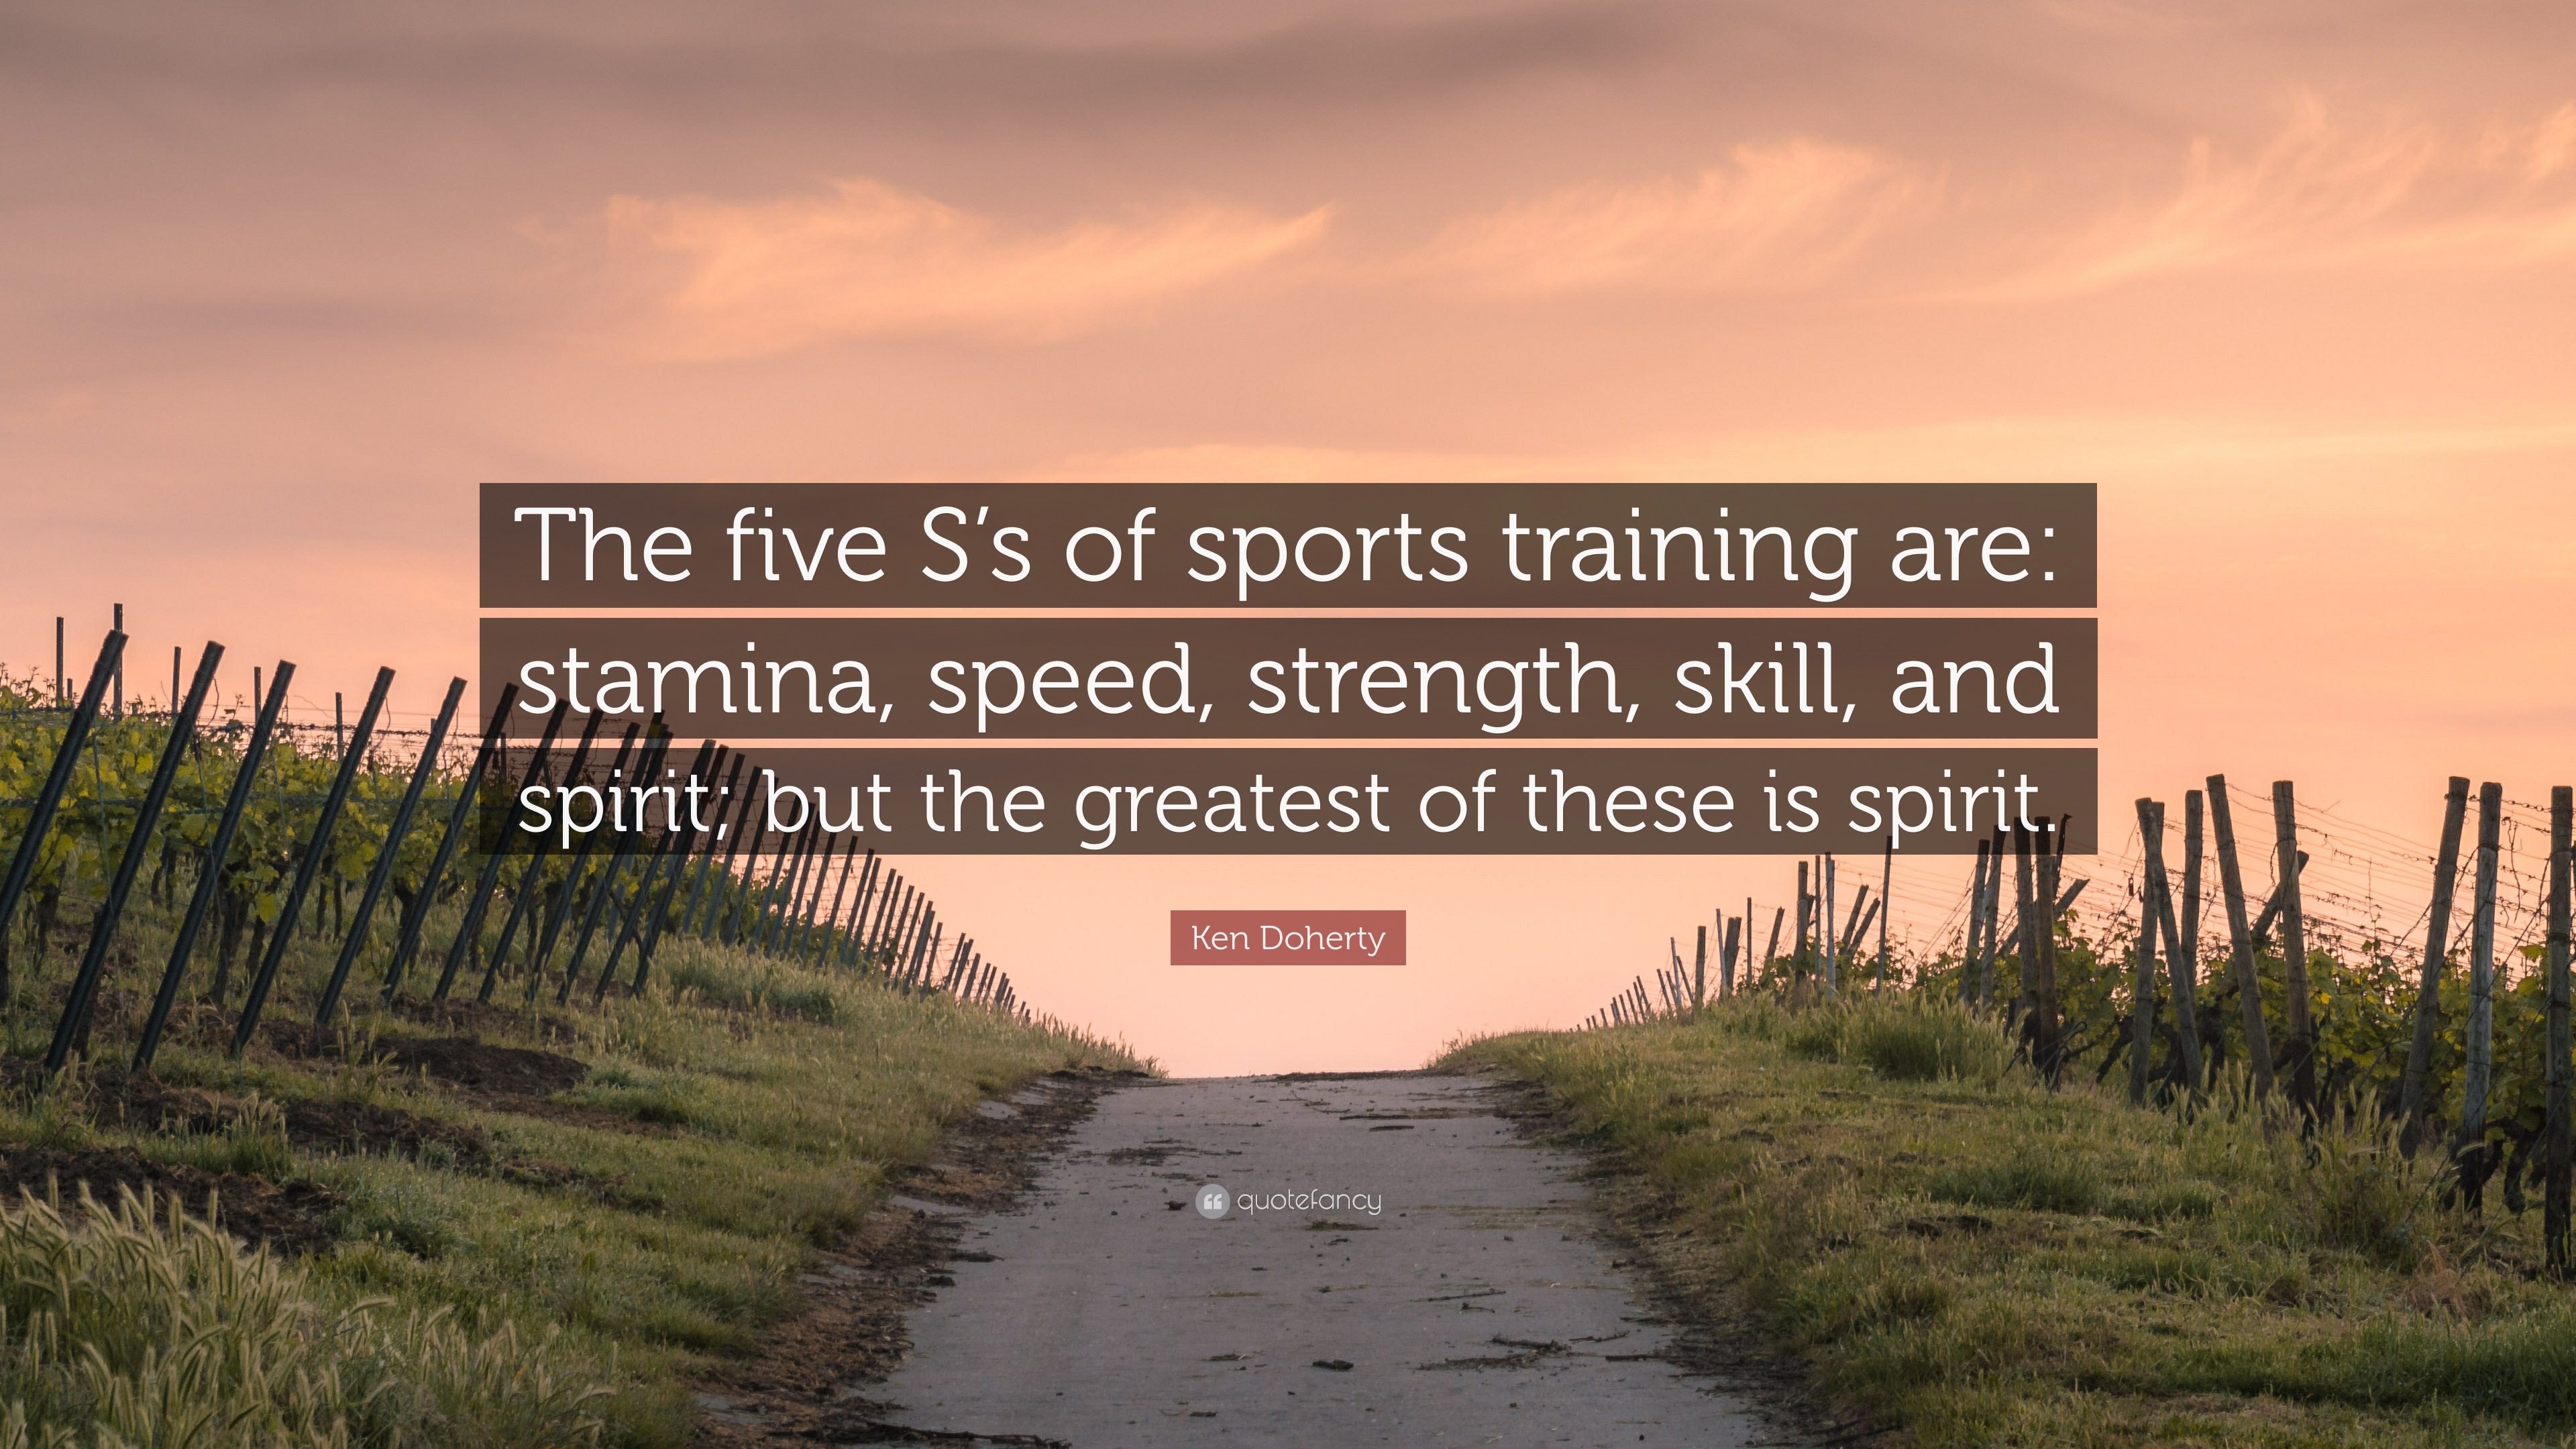 Ken Doherty Quote: “The five S's of sports training are: stamina